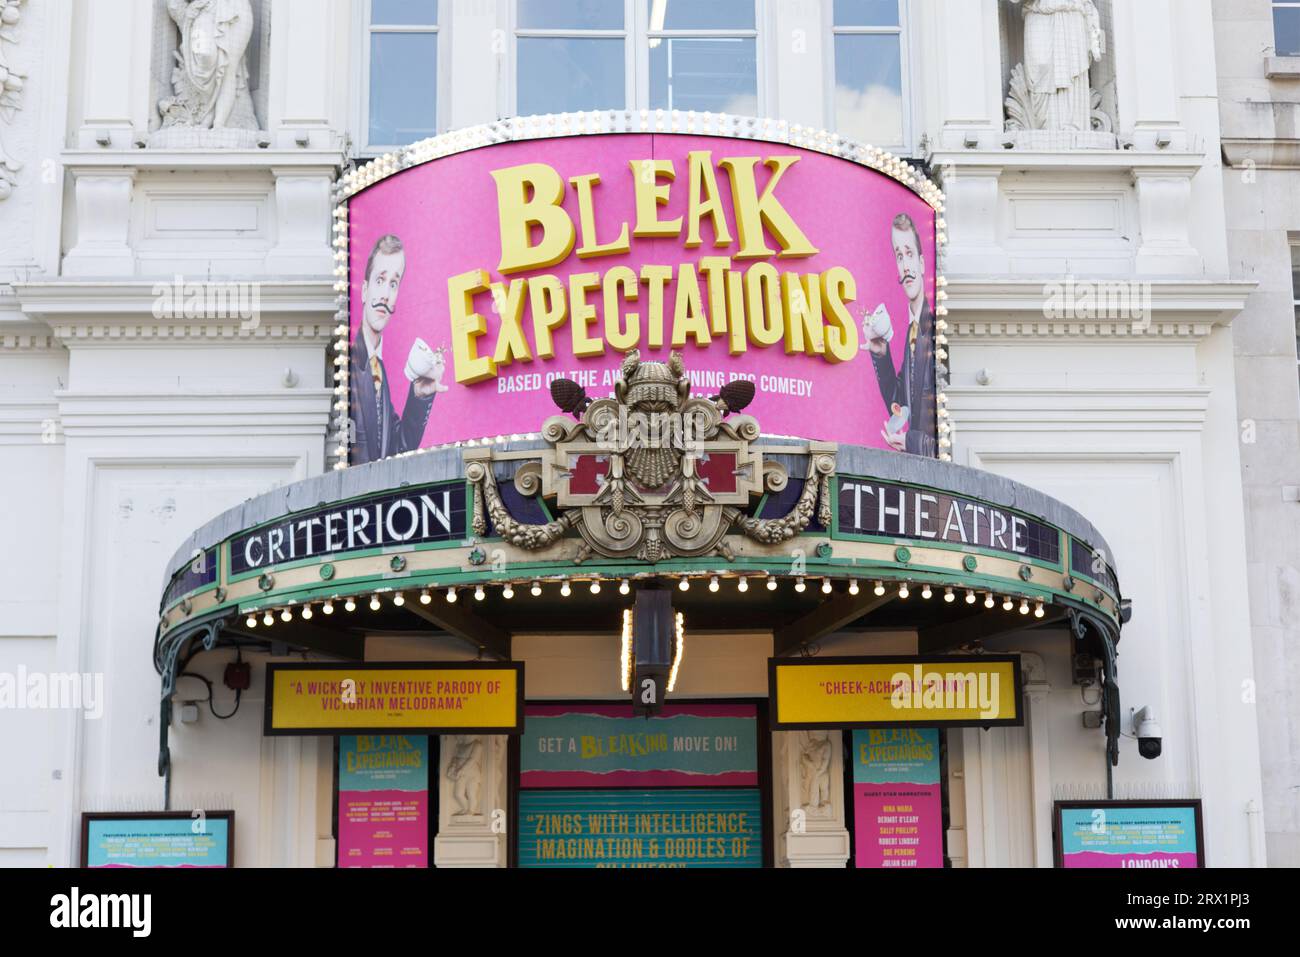 bleak expectations at the Criterion theatre Stock Photo